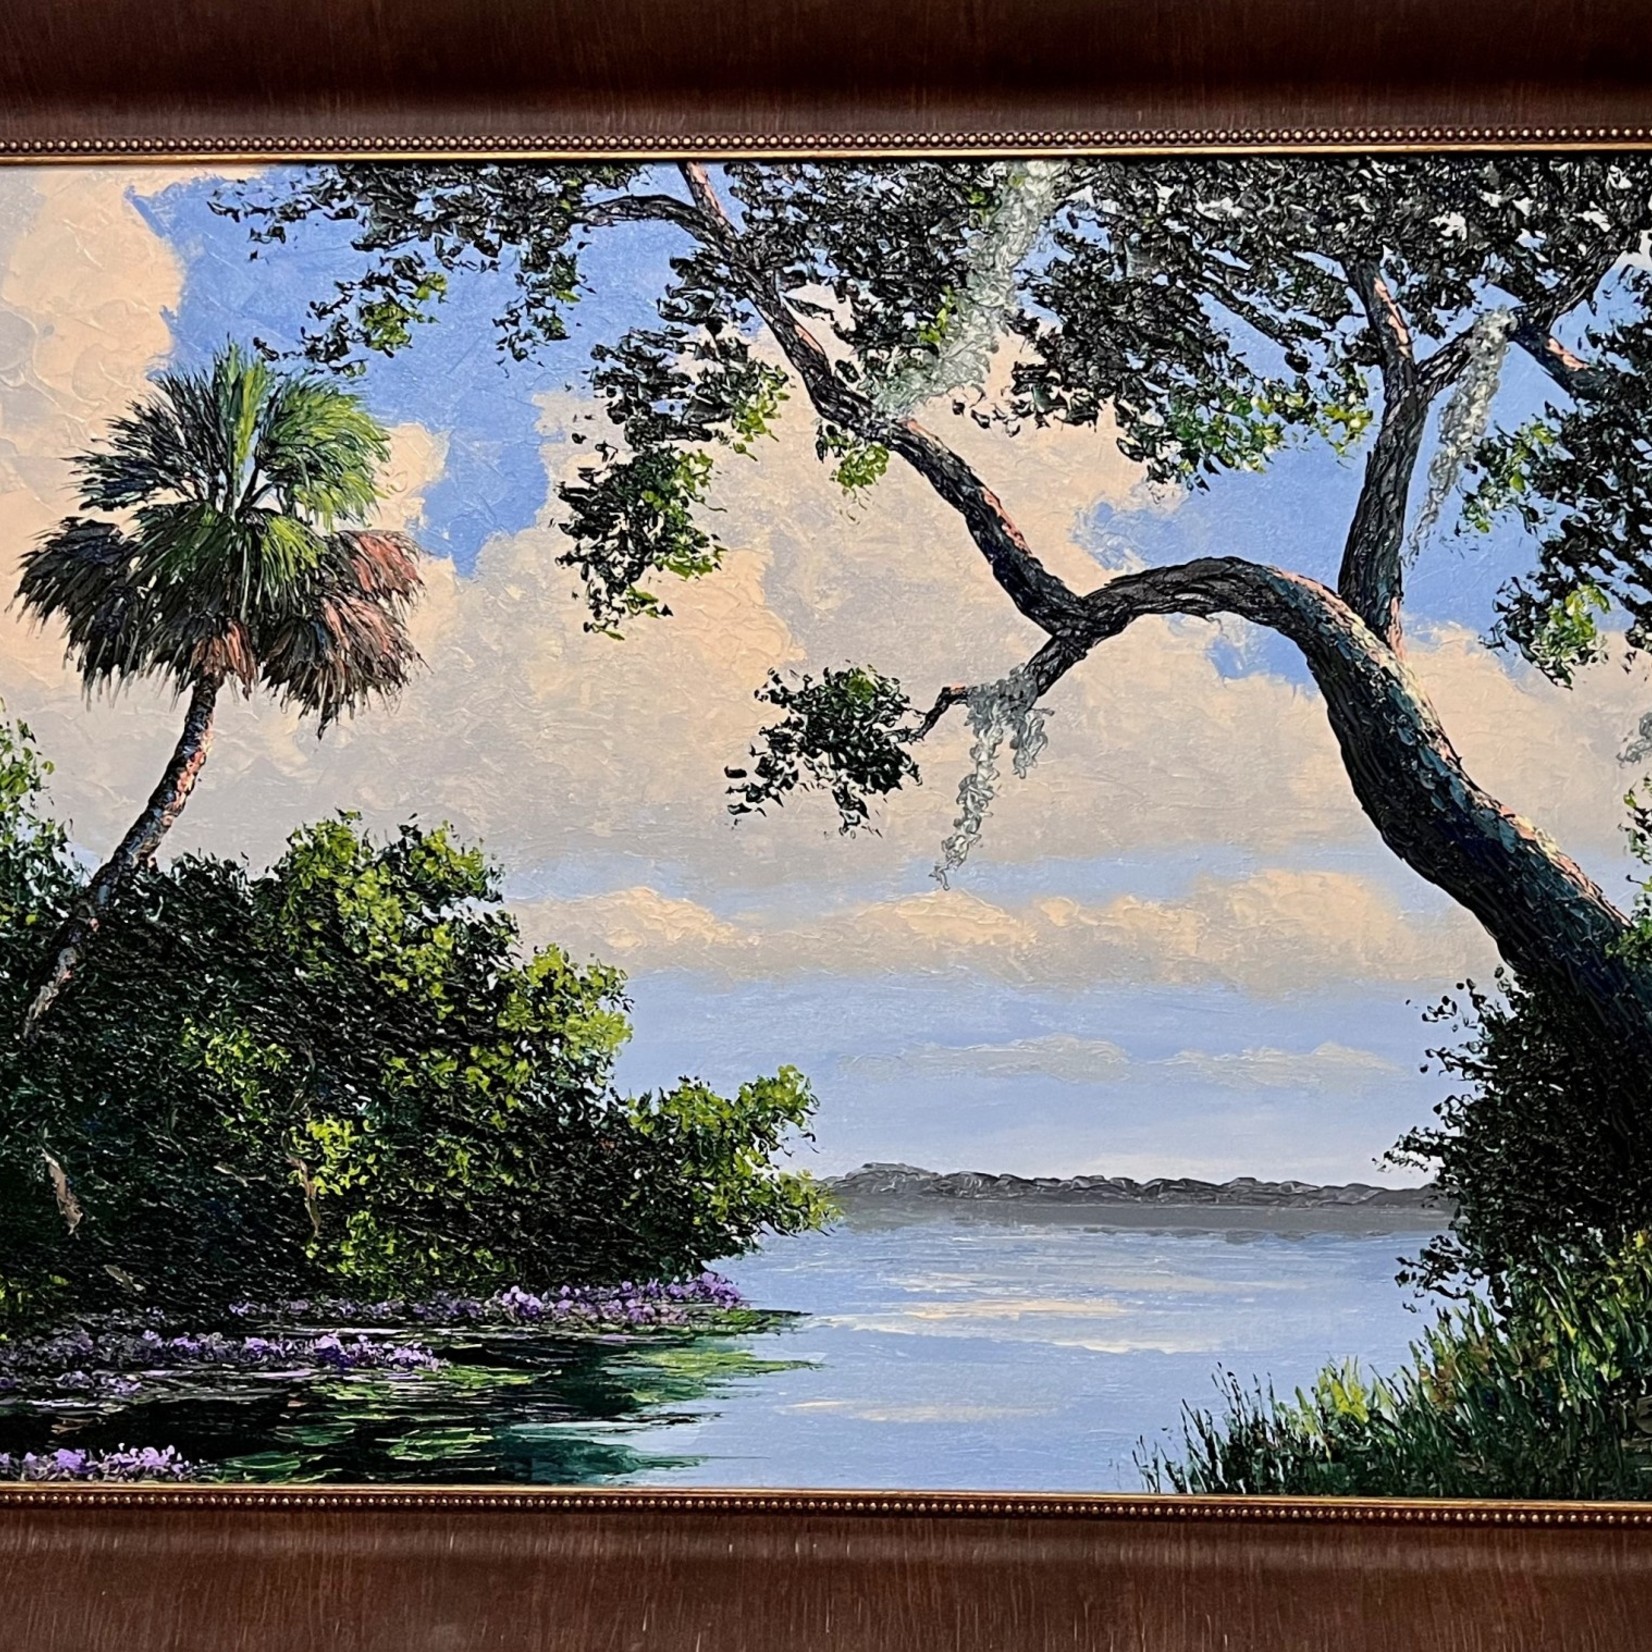 AE Backus, Highwaymen (Original/2nd Generation/Legacy), Indian River School Hyacinth Bloom/Indian River Lagoon, Stanford, oil on canvas, 42x30" framed, RARE